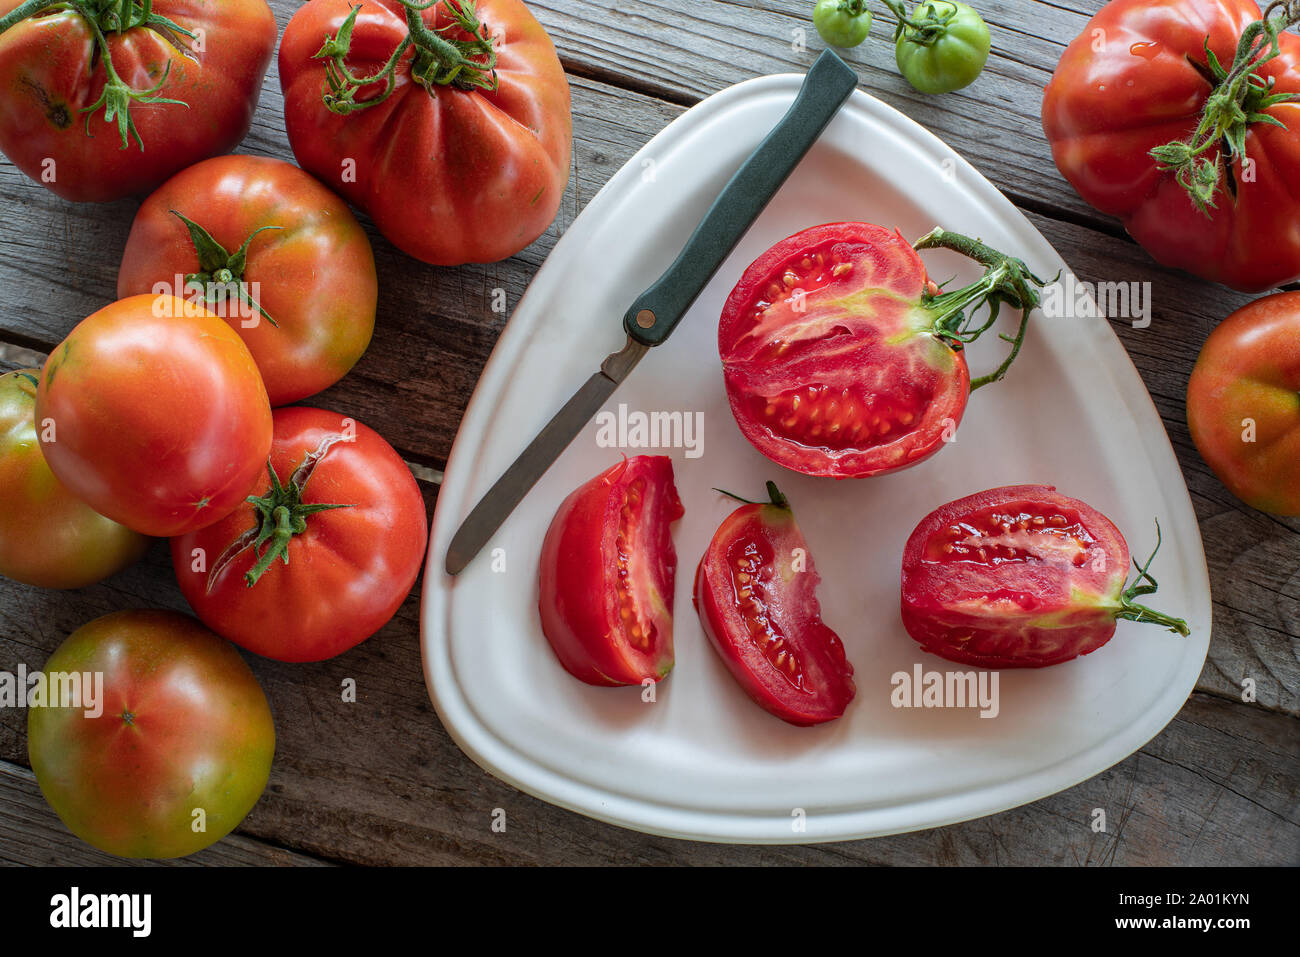 group of tomatoes with sliced tomato on plate Stock Photo